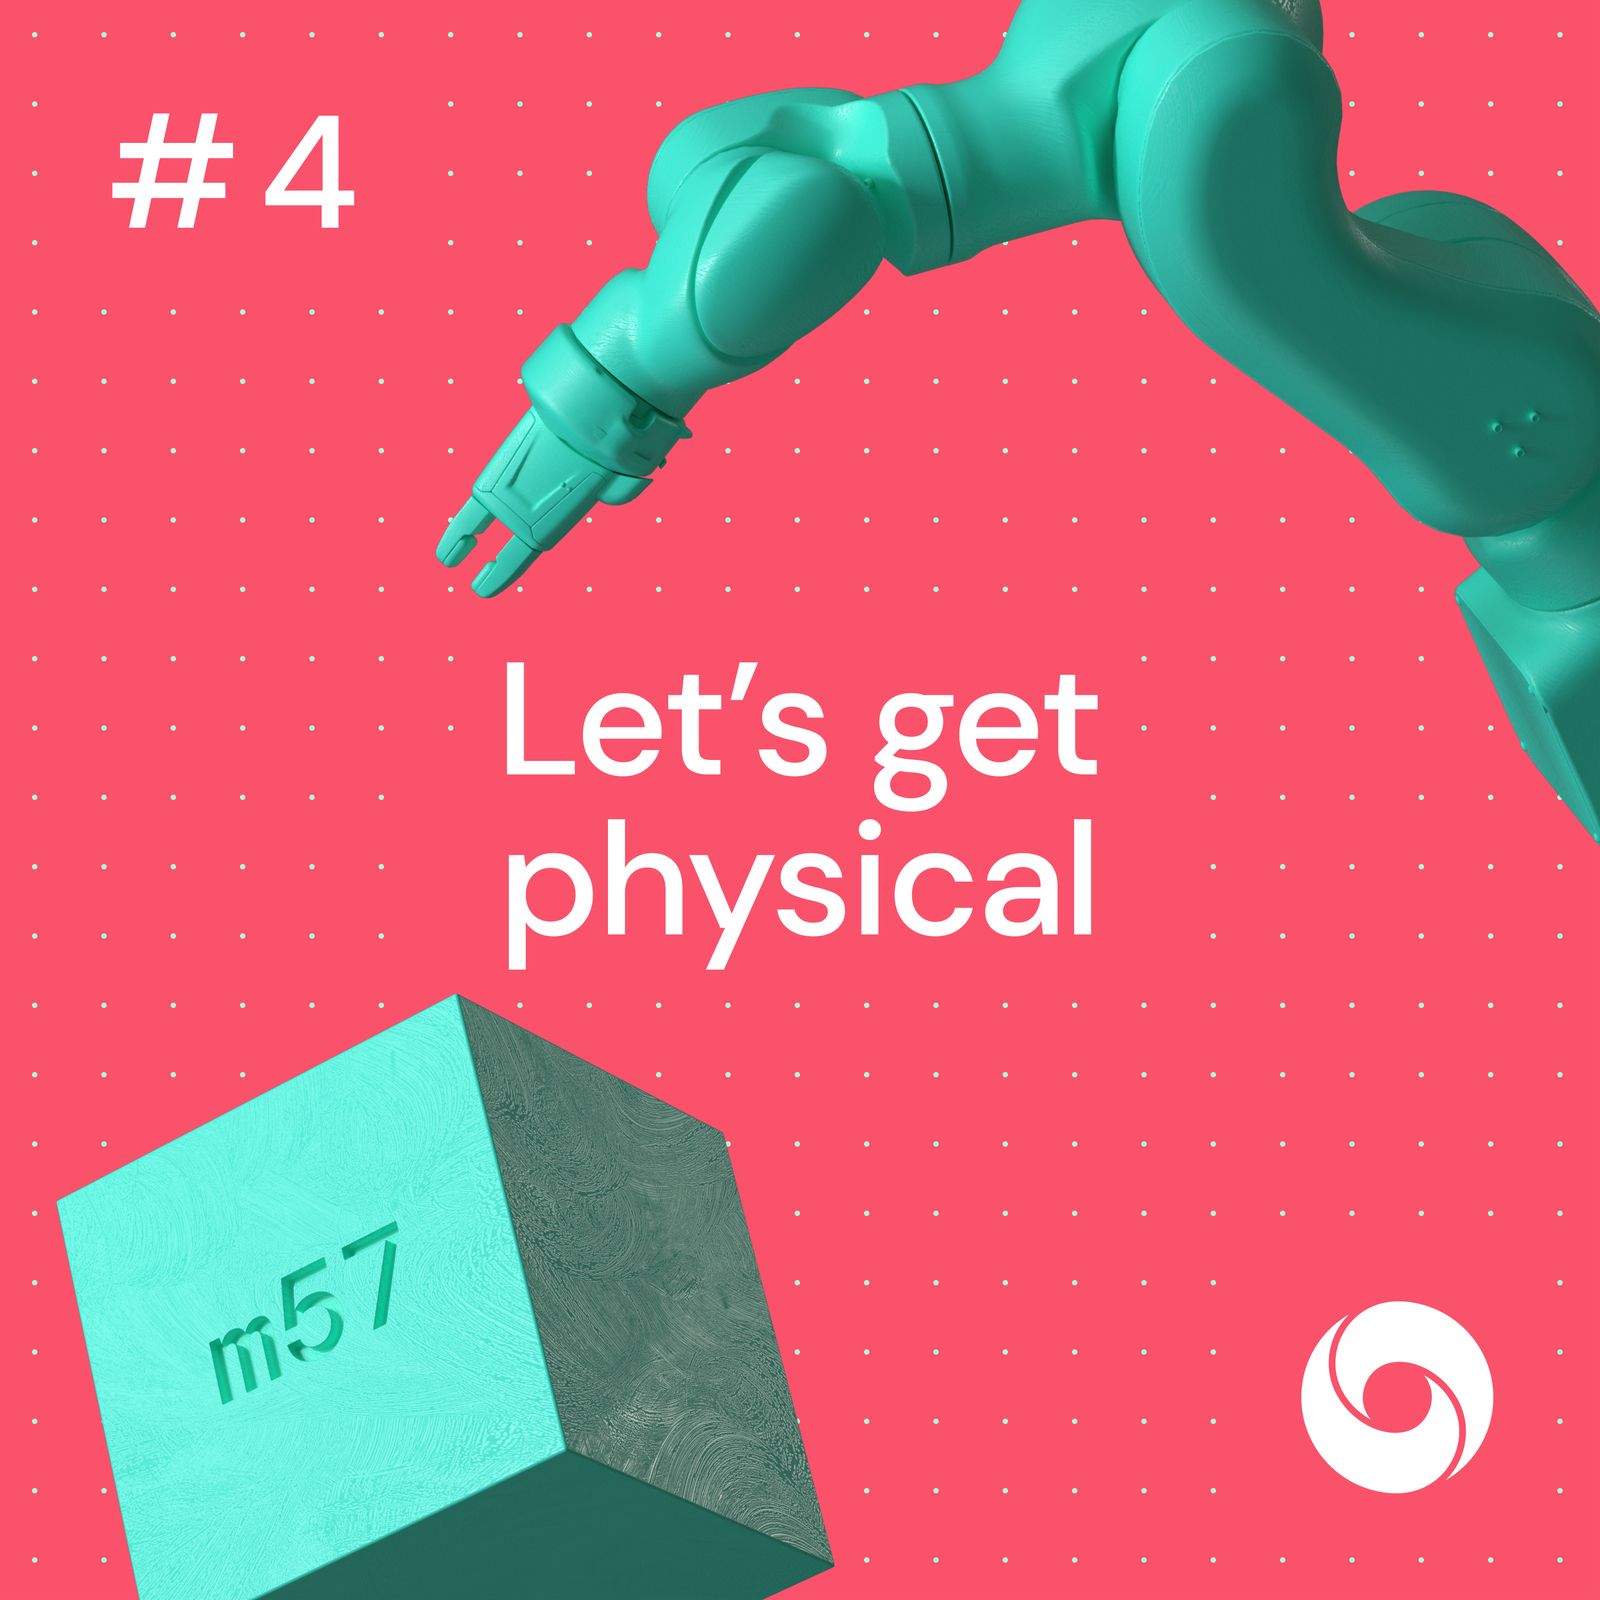 S2 Ep4: Let's get physical